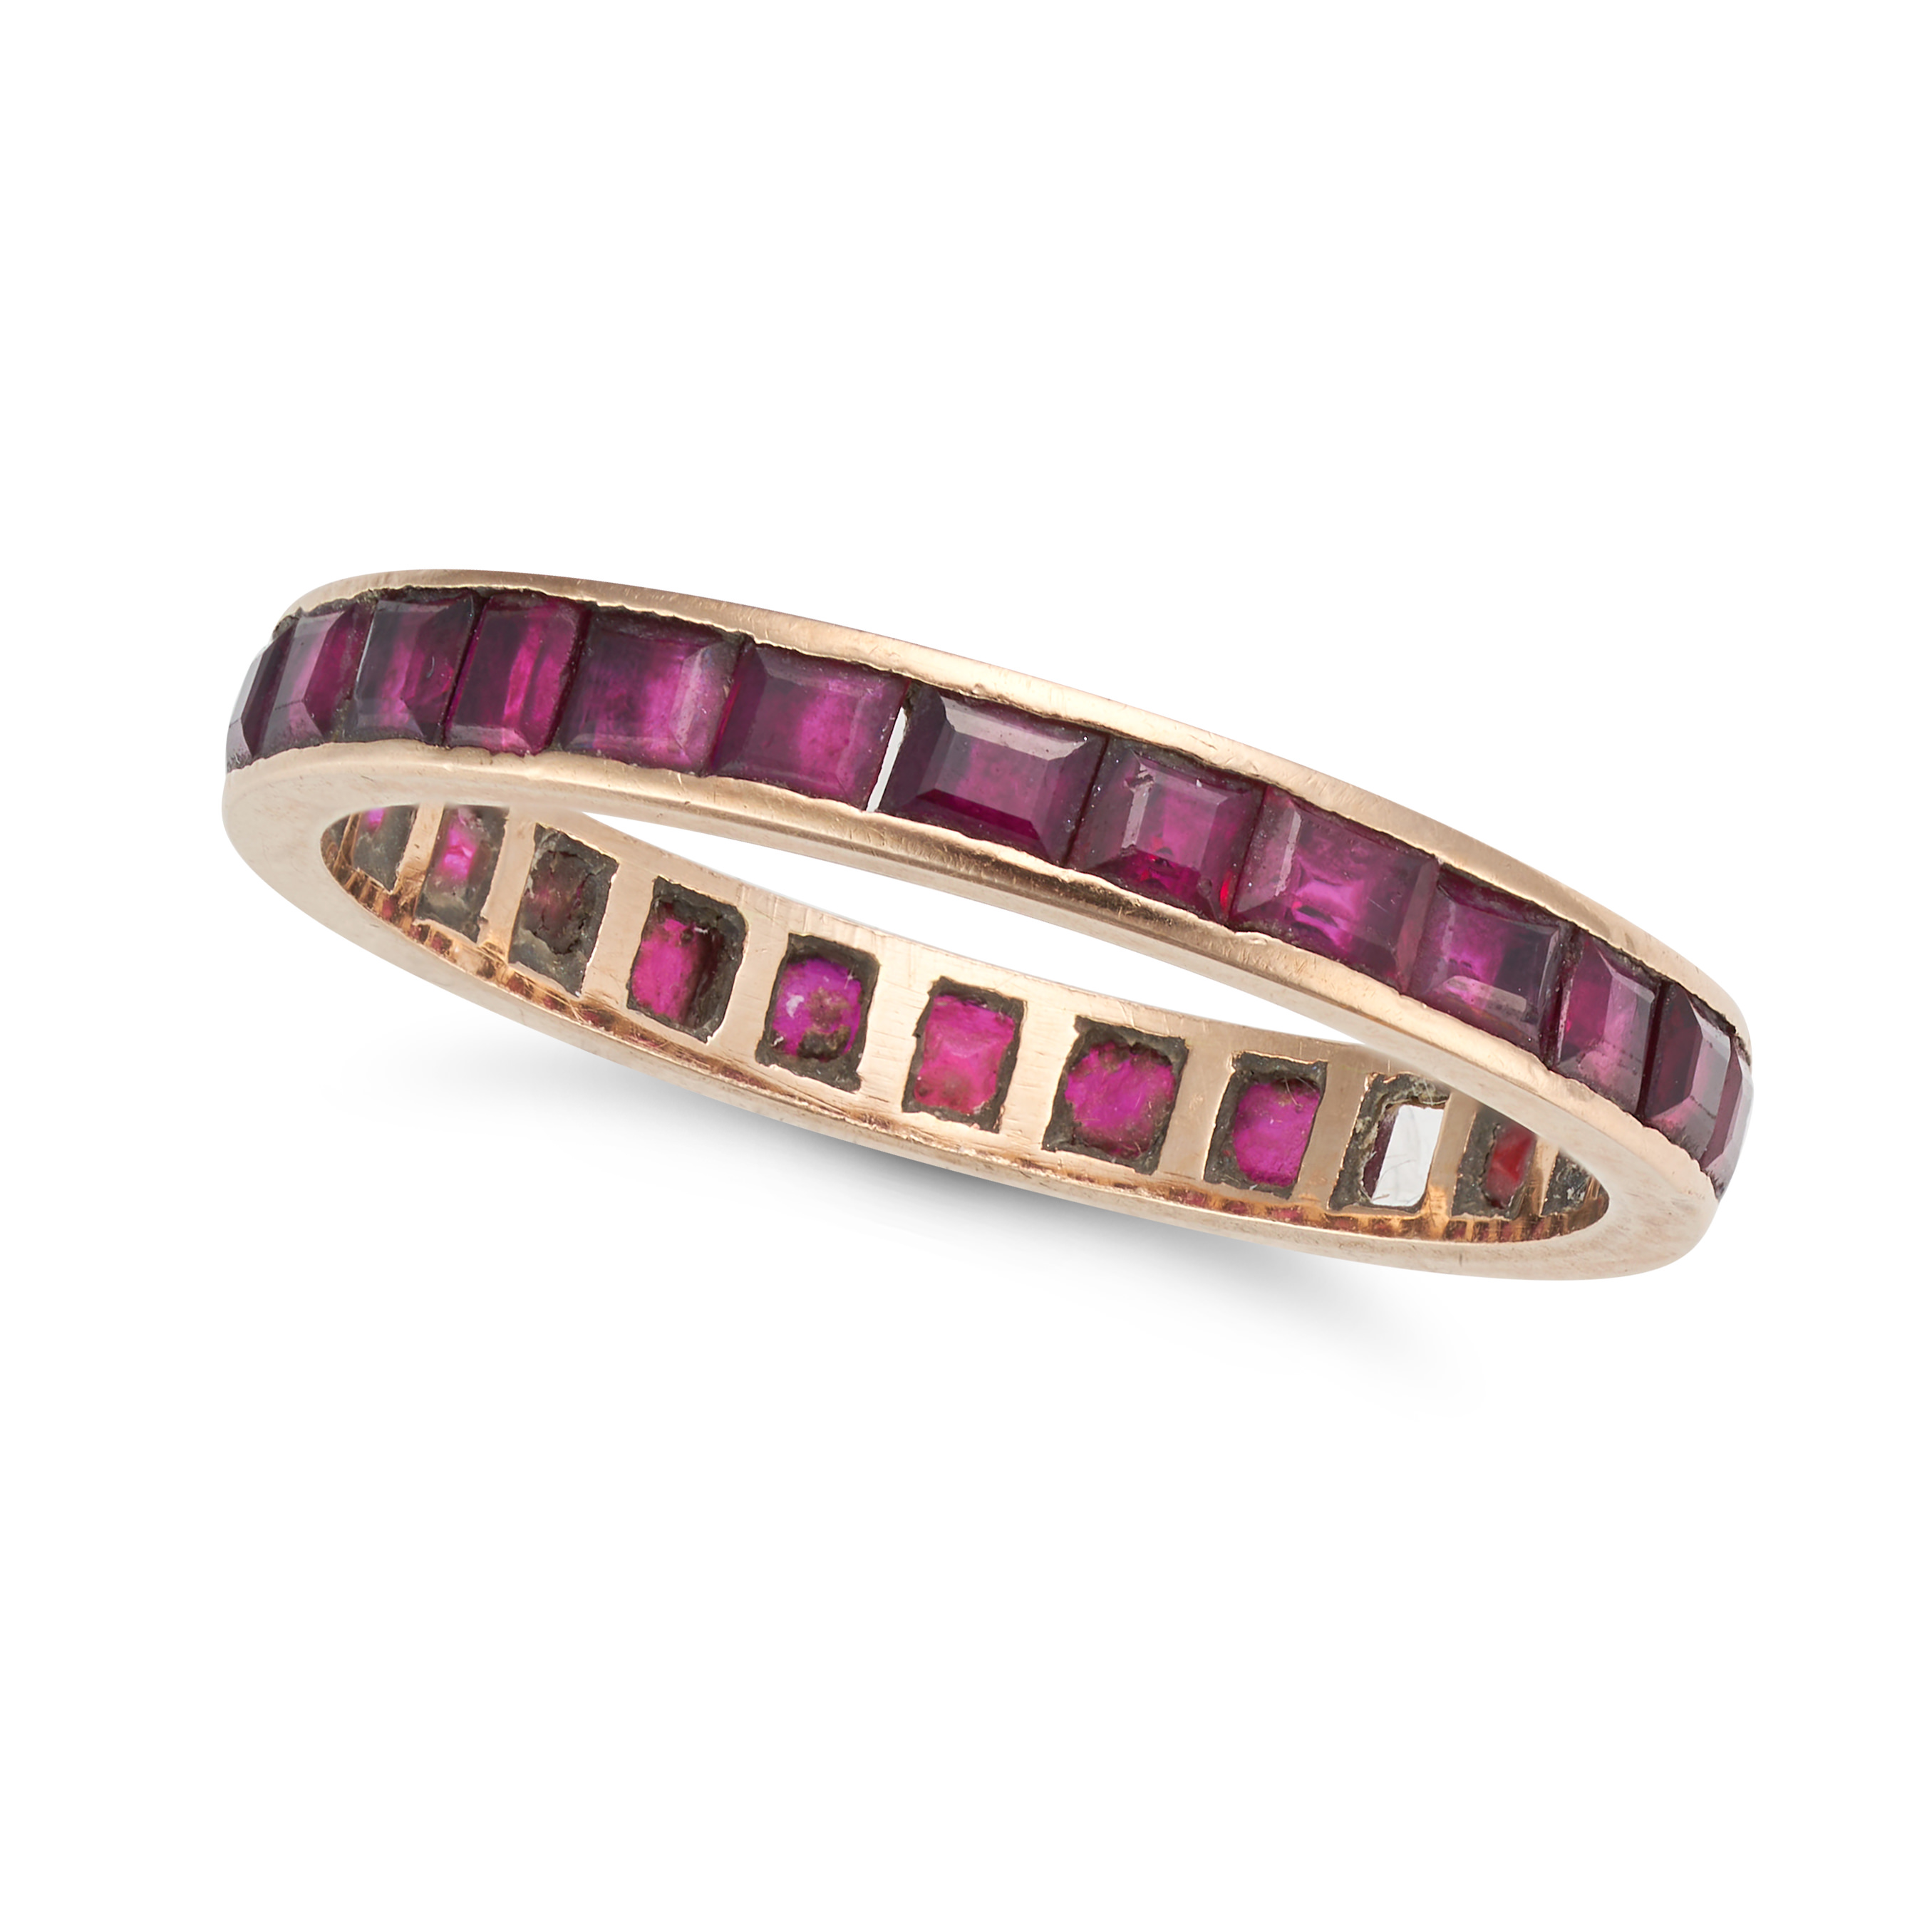 NO RESERVE - A RUBY ETERNITY RING set all around with a row of square step cut rubies, one stone ...